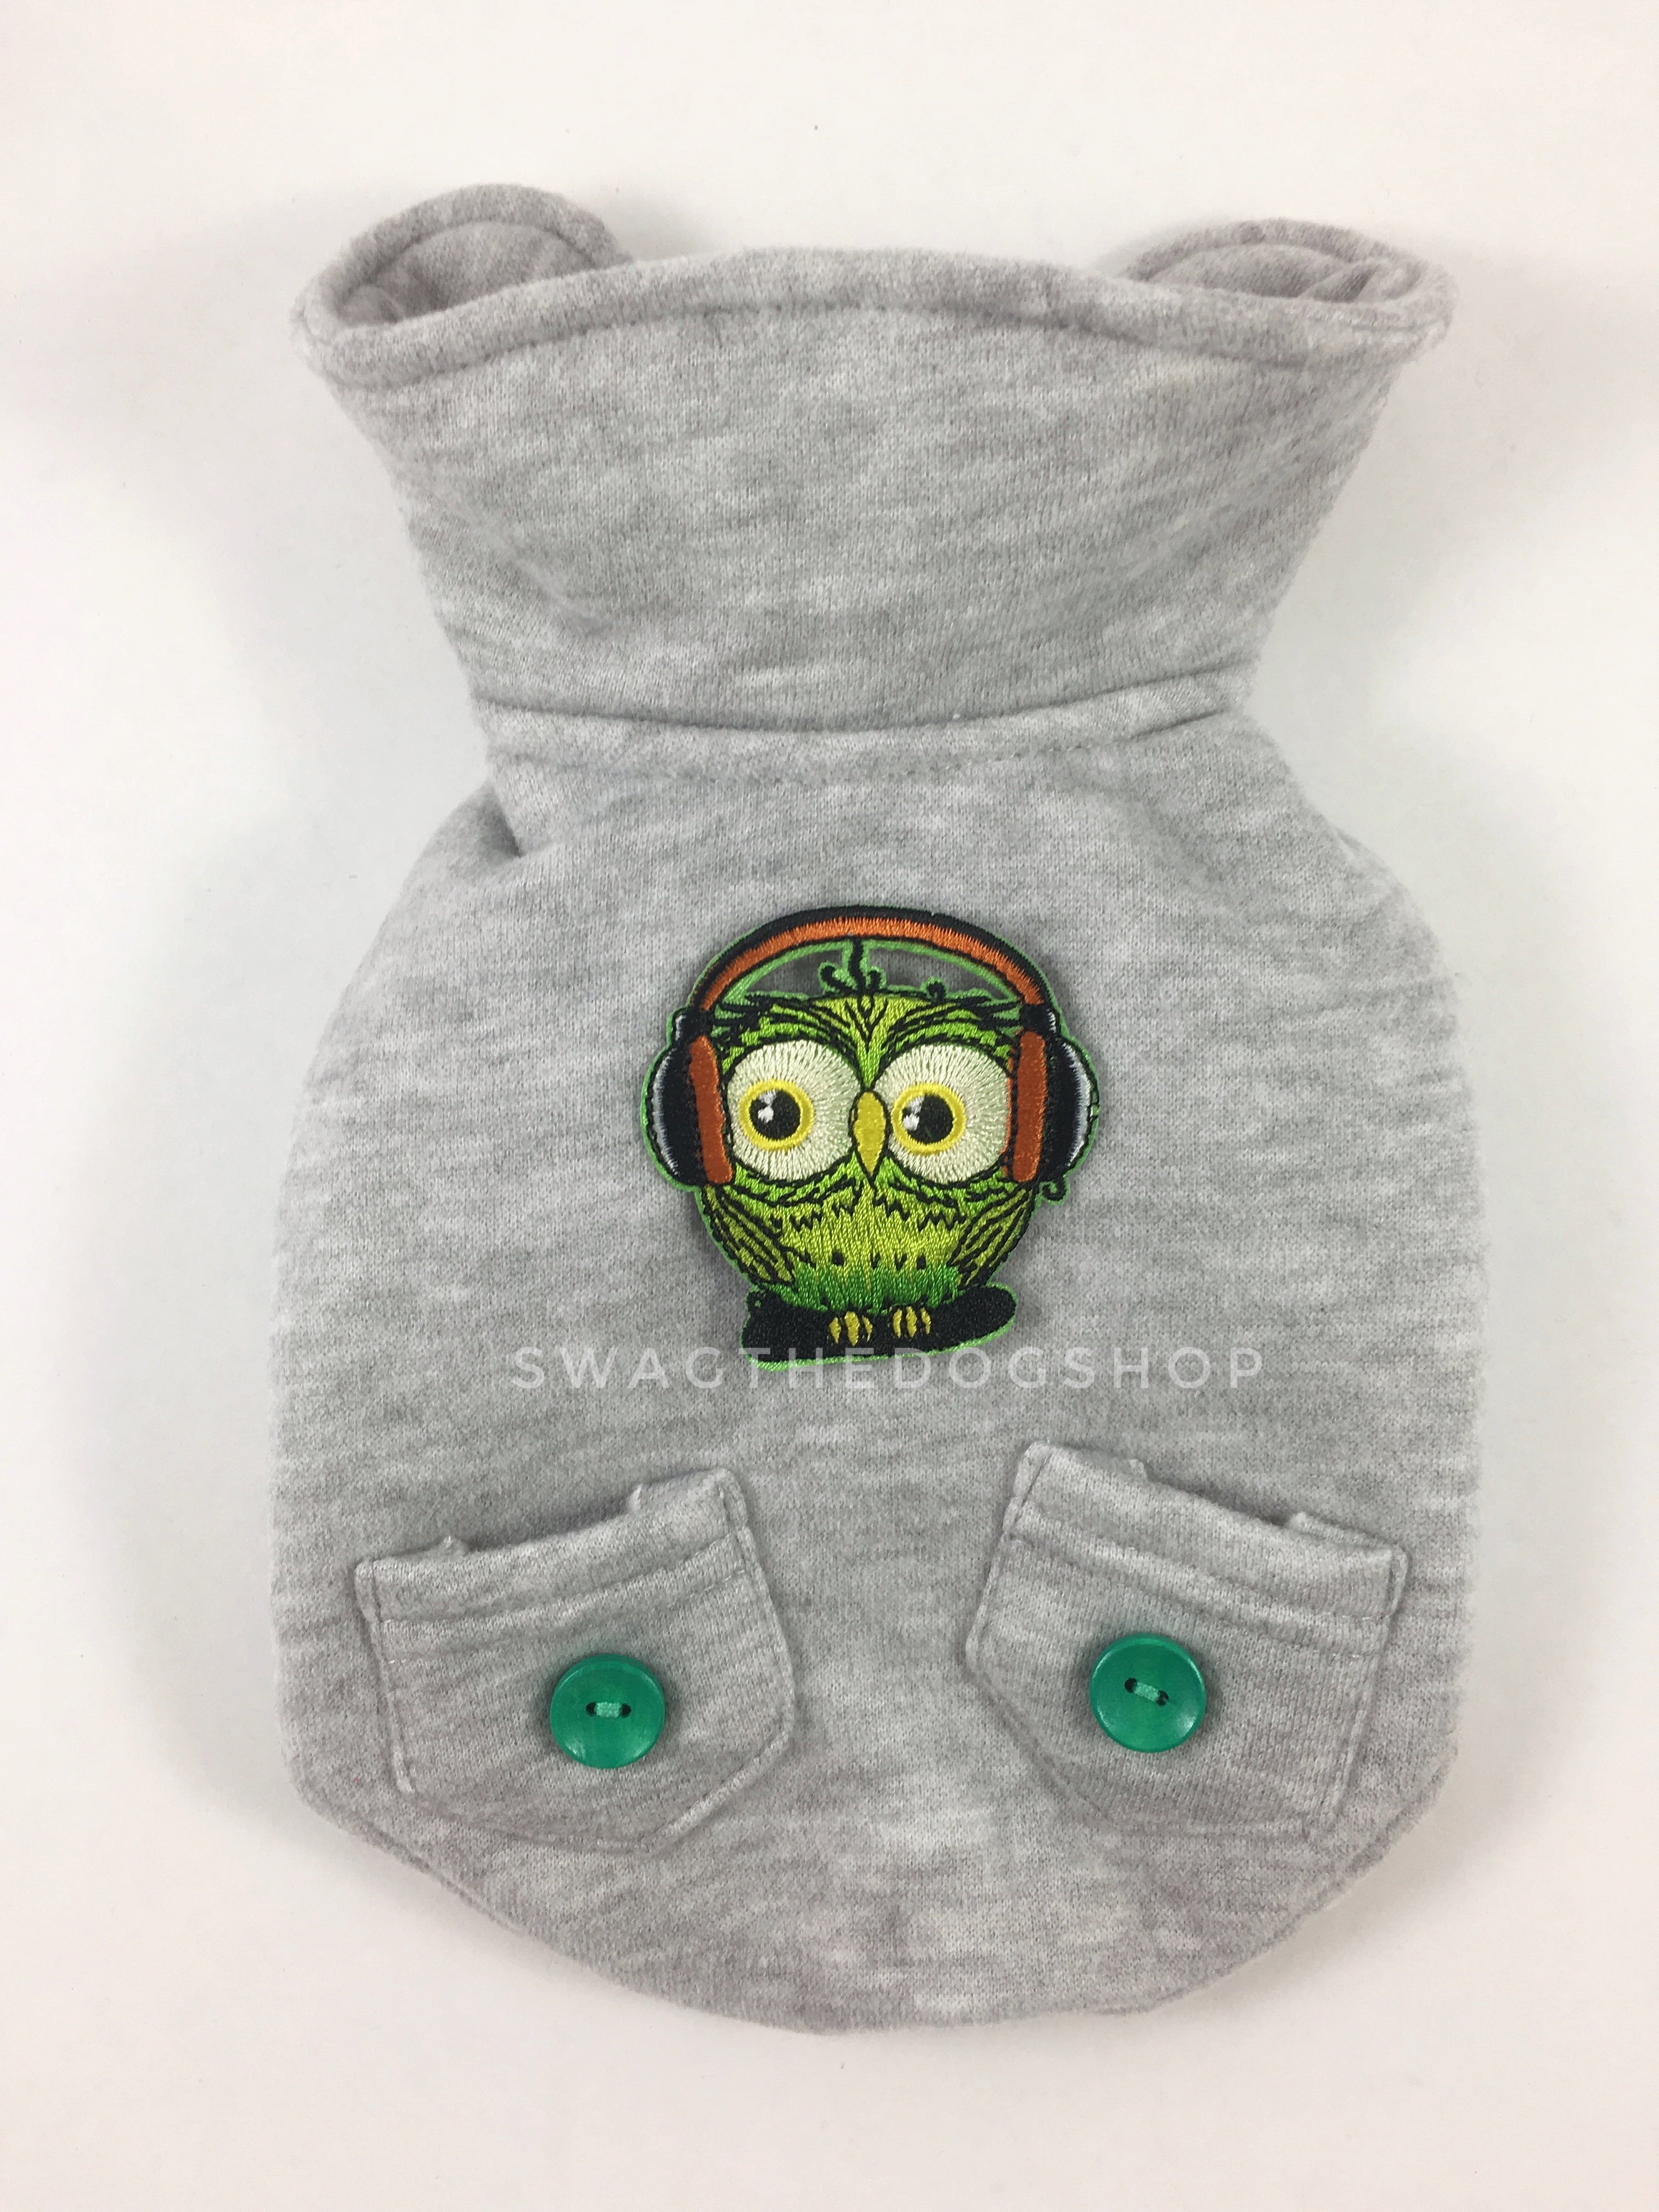 Yachtsman Heather Gray Shirt - Patch Option of Green DJ Owl on the Back. Heather Gray Shirt with Fleece Inside